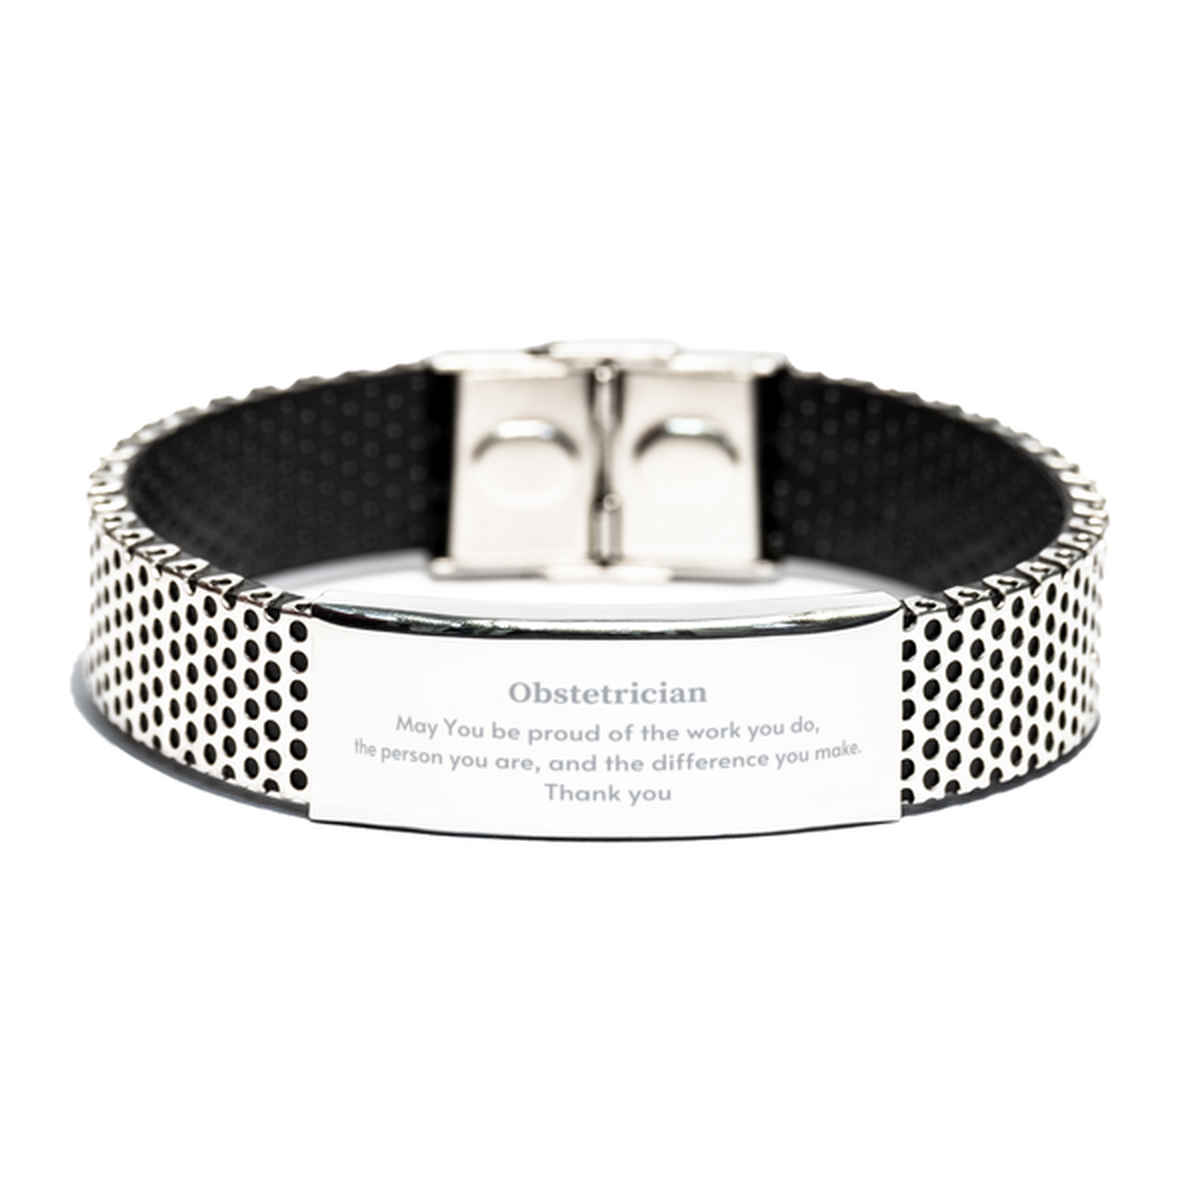 Heartwarming Stainless Steel Bracelet Retirement Coworkers Gifts for Obstetrician, Obstetrician May You be proud of the work you do, the person you are Gifts for Boss Men Women Friends